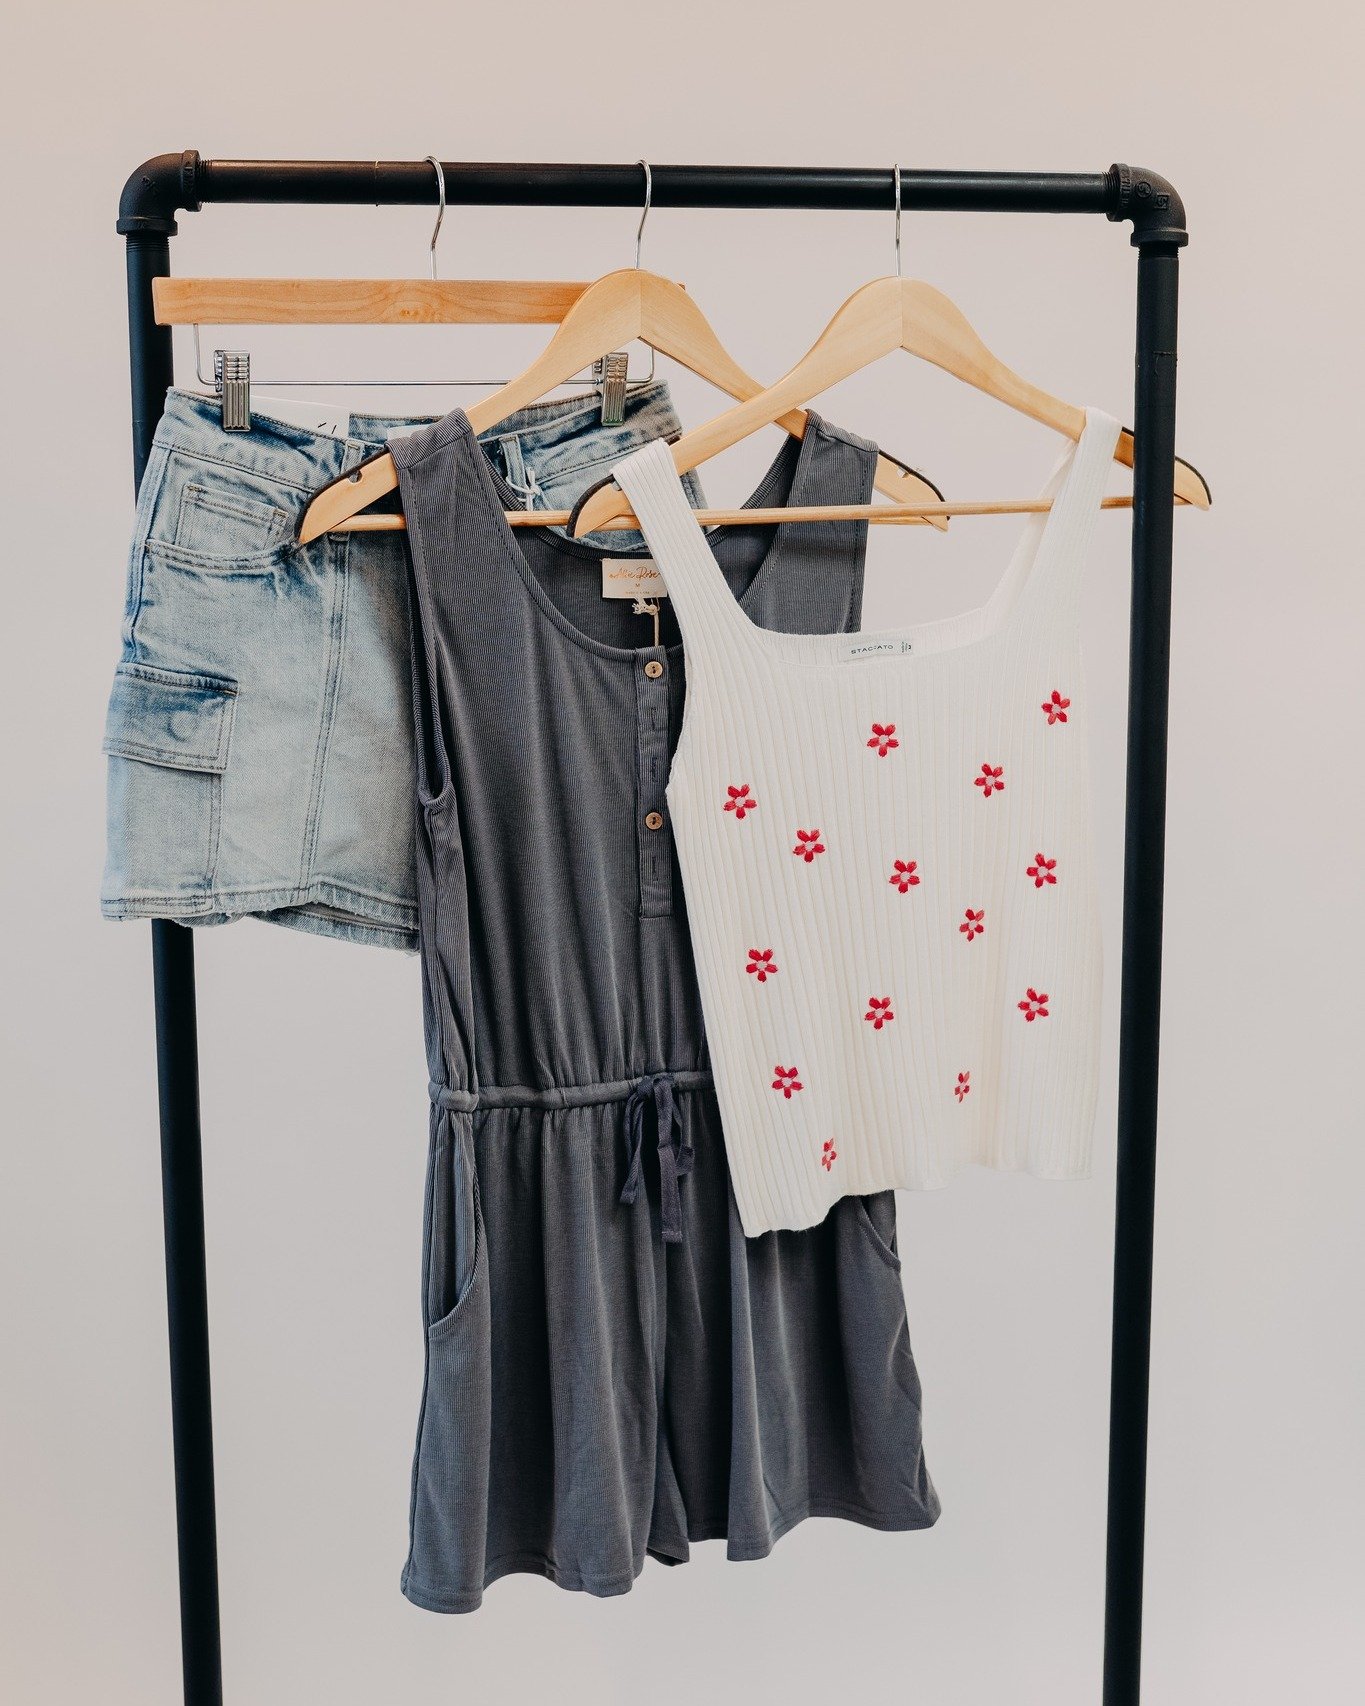 ☀️Summer is here, and so are our new arrivals at Mustard Seed Boutique!☀️ 

Get ready to fall in love with our classic and trending styles that are perfect for sunny days, lake days, and cool nights! From breezy dresses to stylish accessories, we&rsq